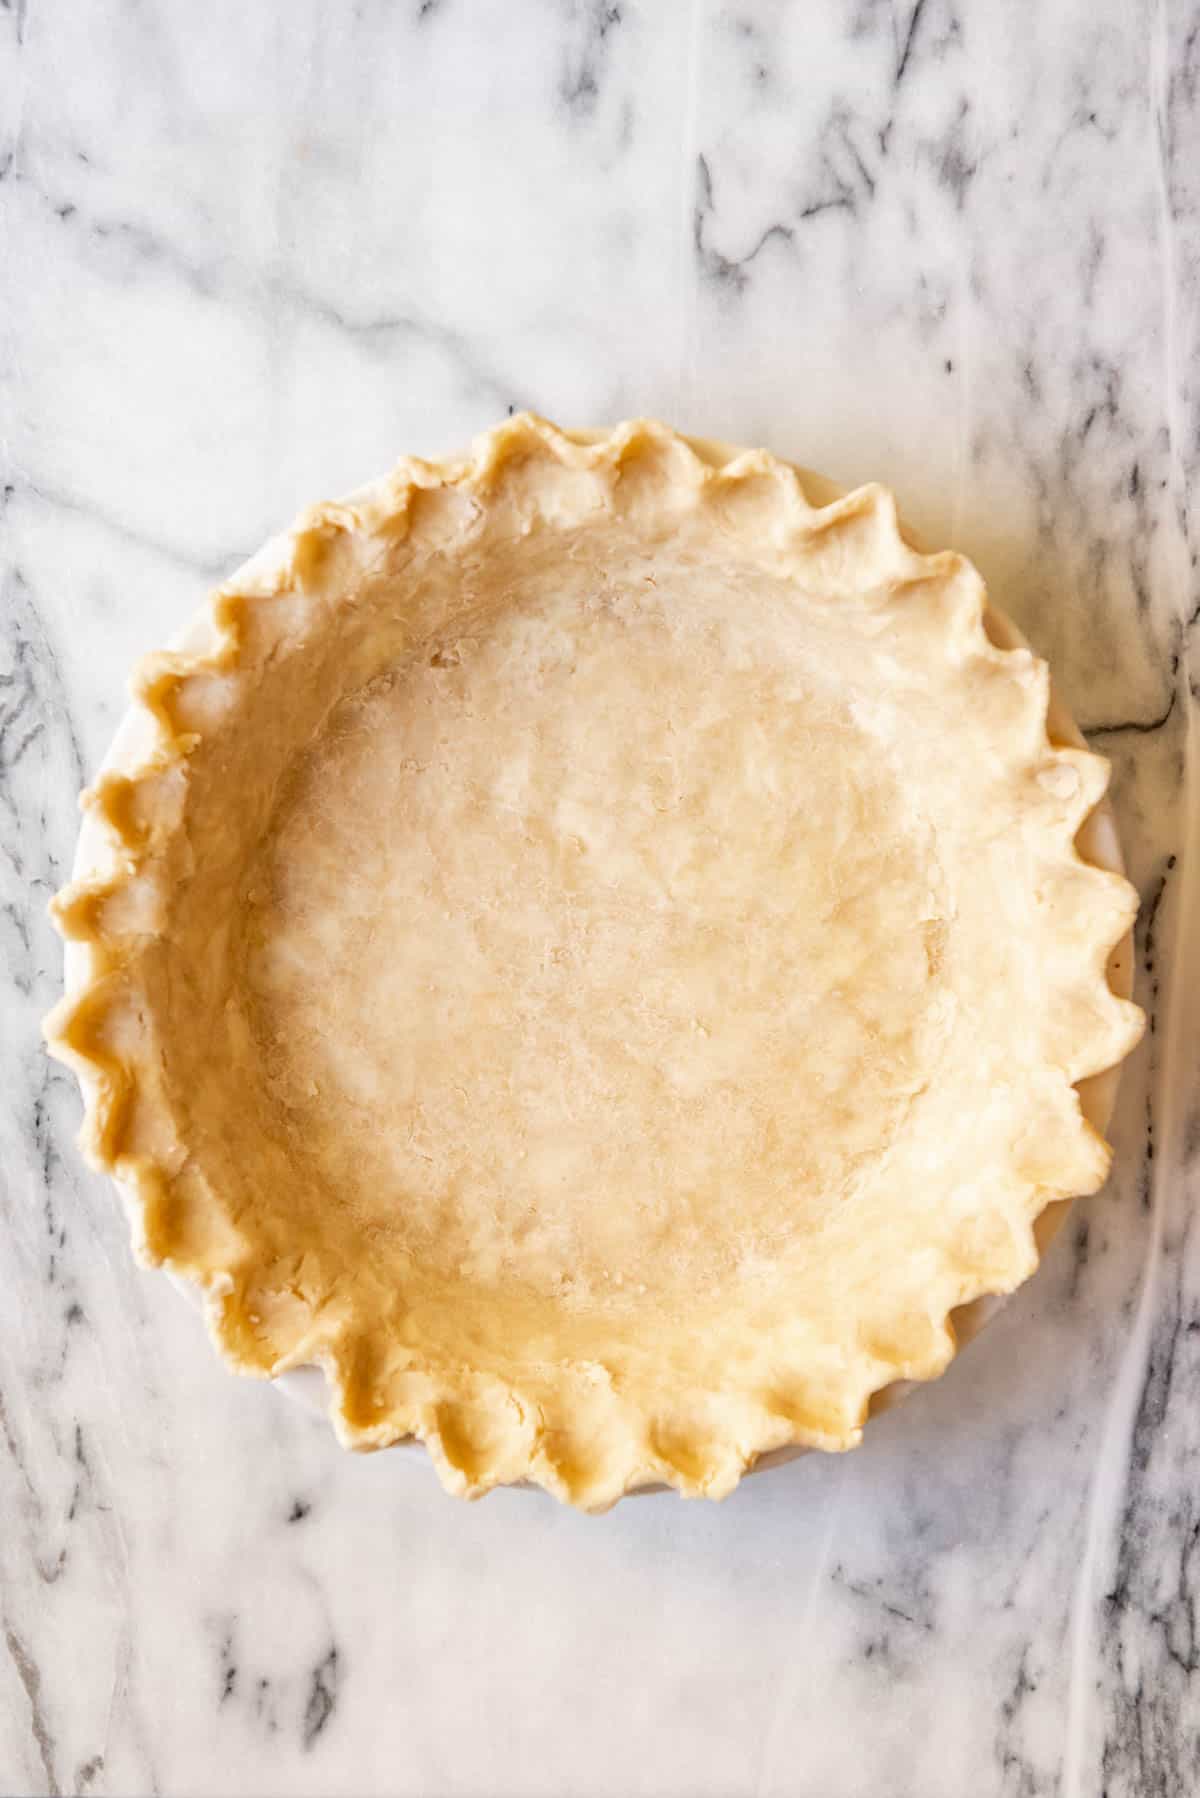 An image of an unbaked pie crust with crimped edges.